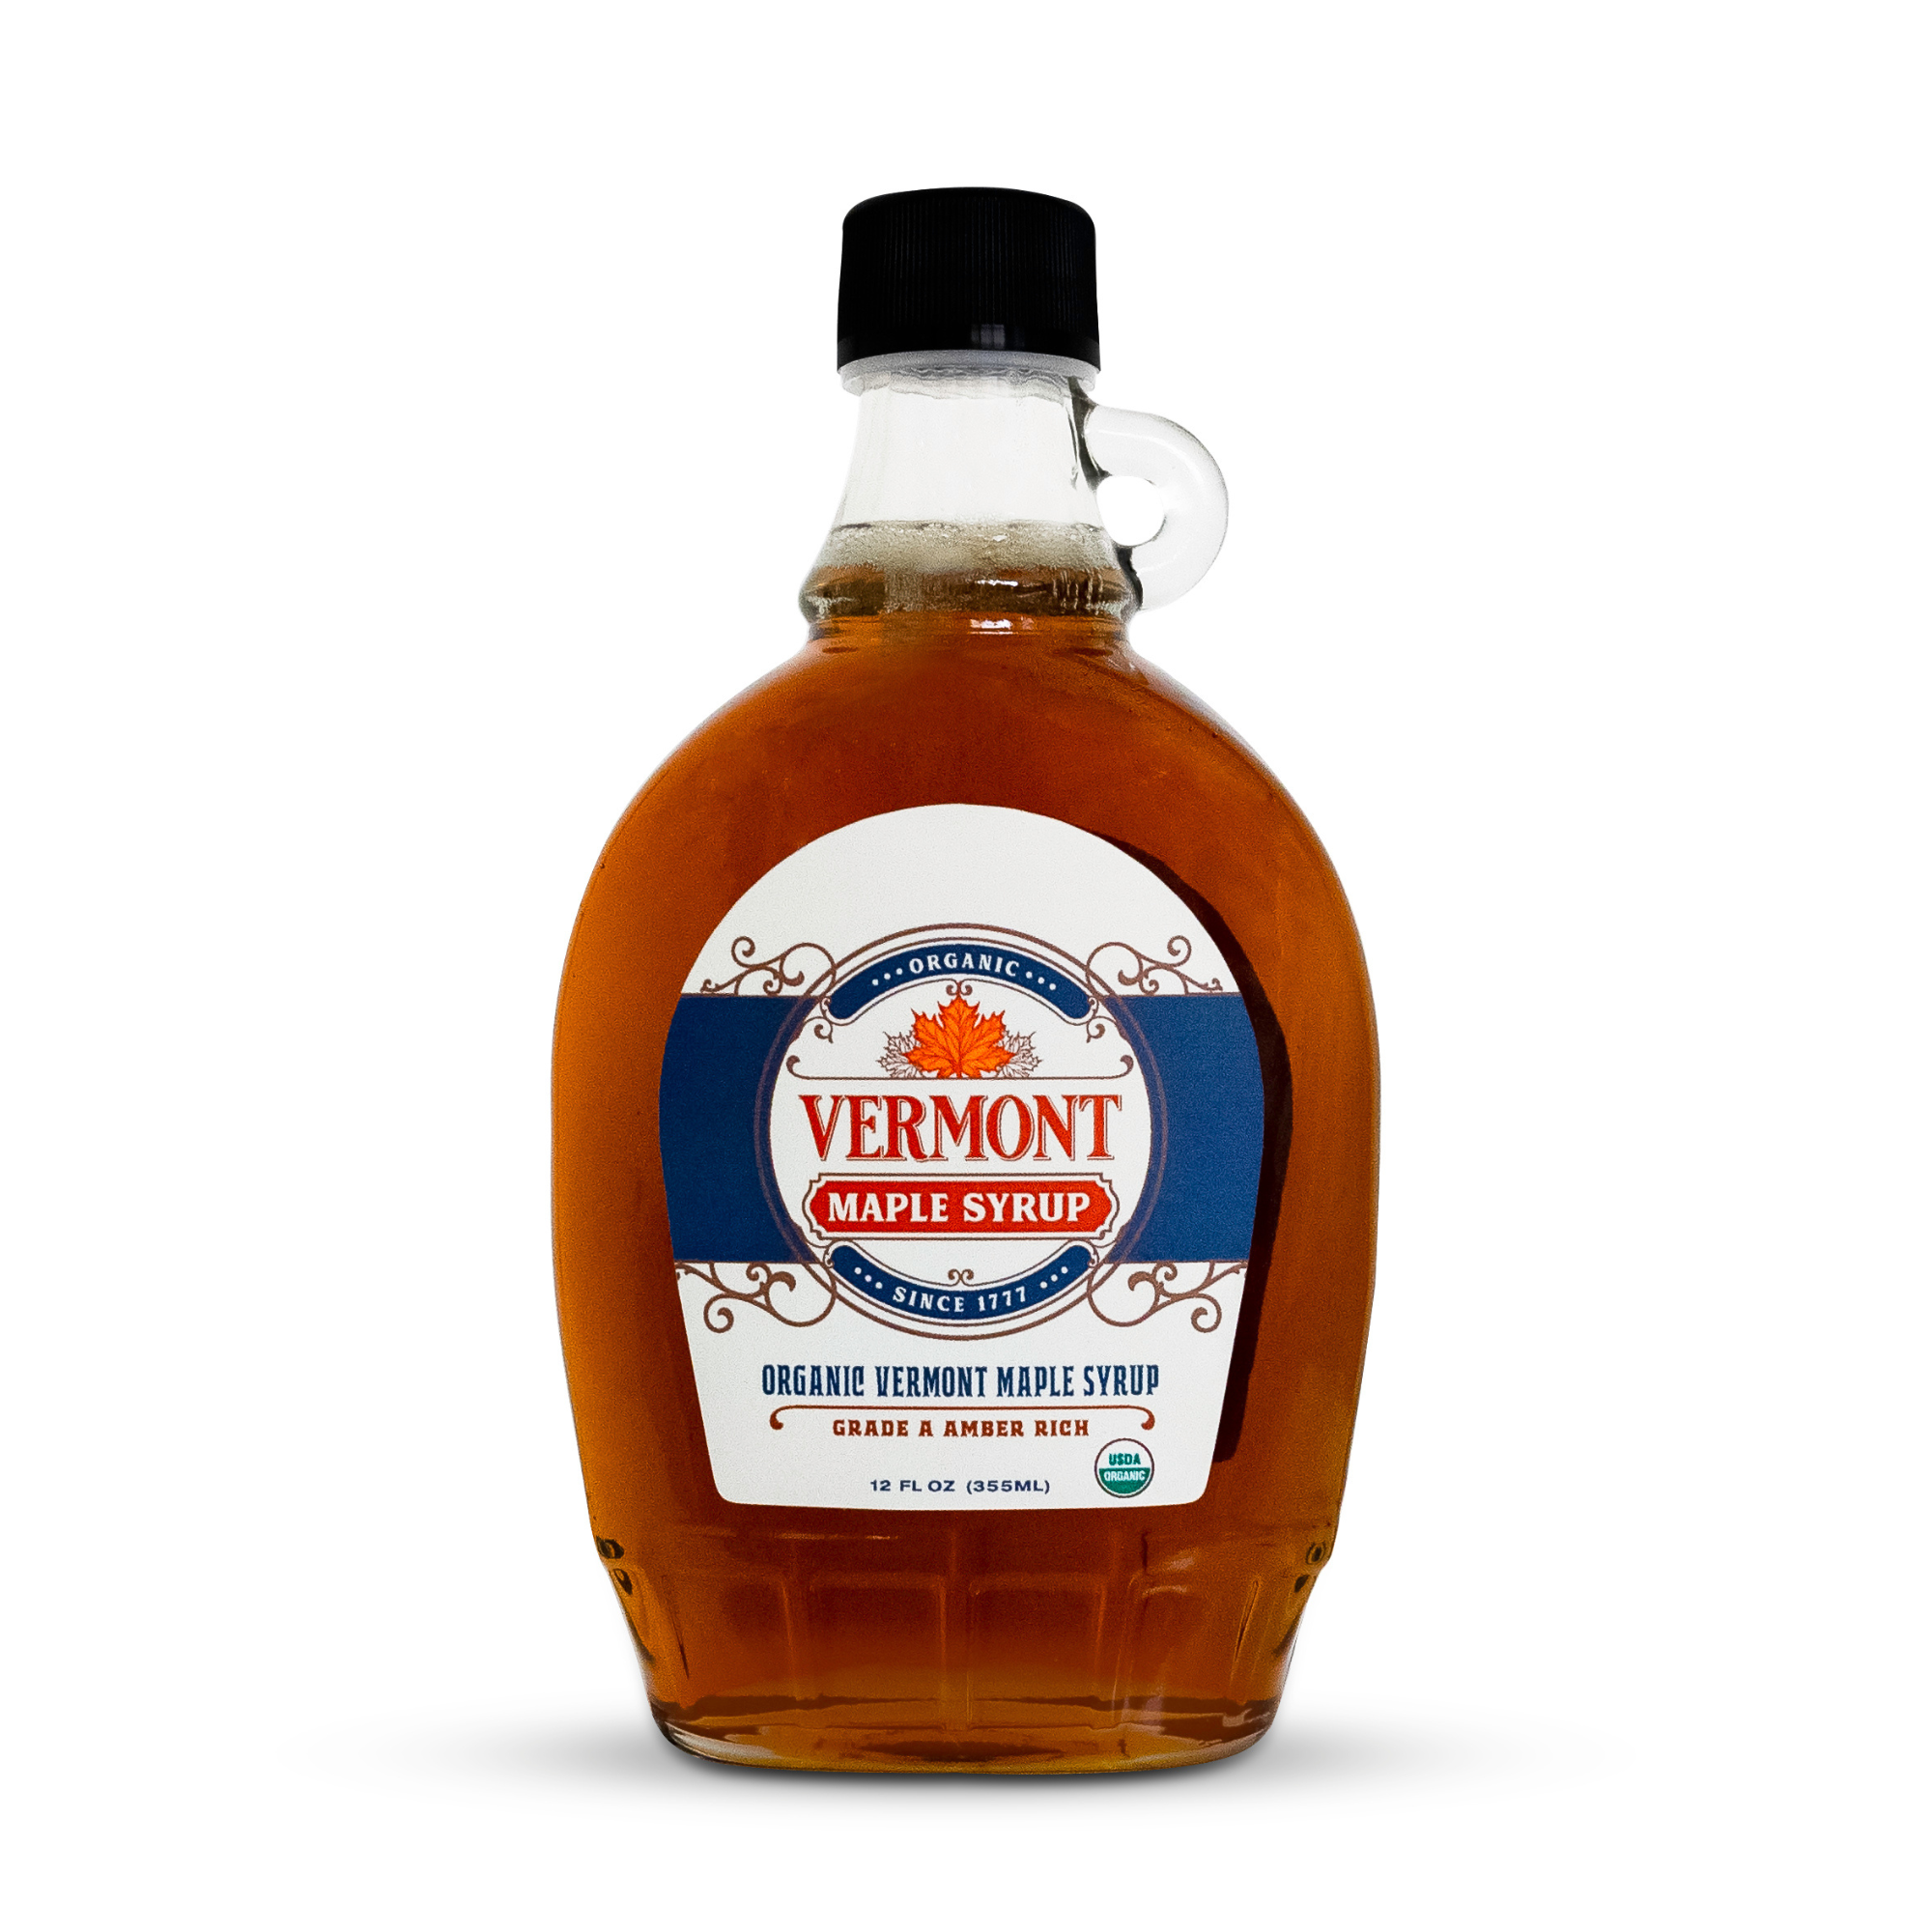 Vermont Maple Syrup wholesale products